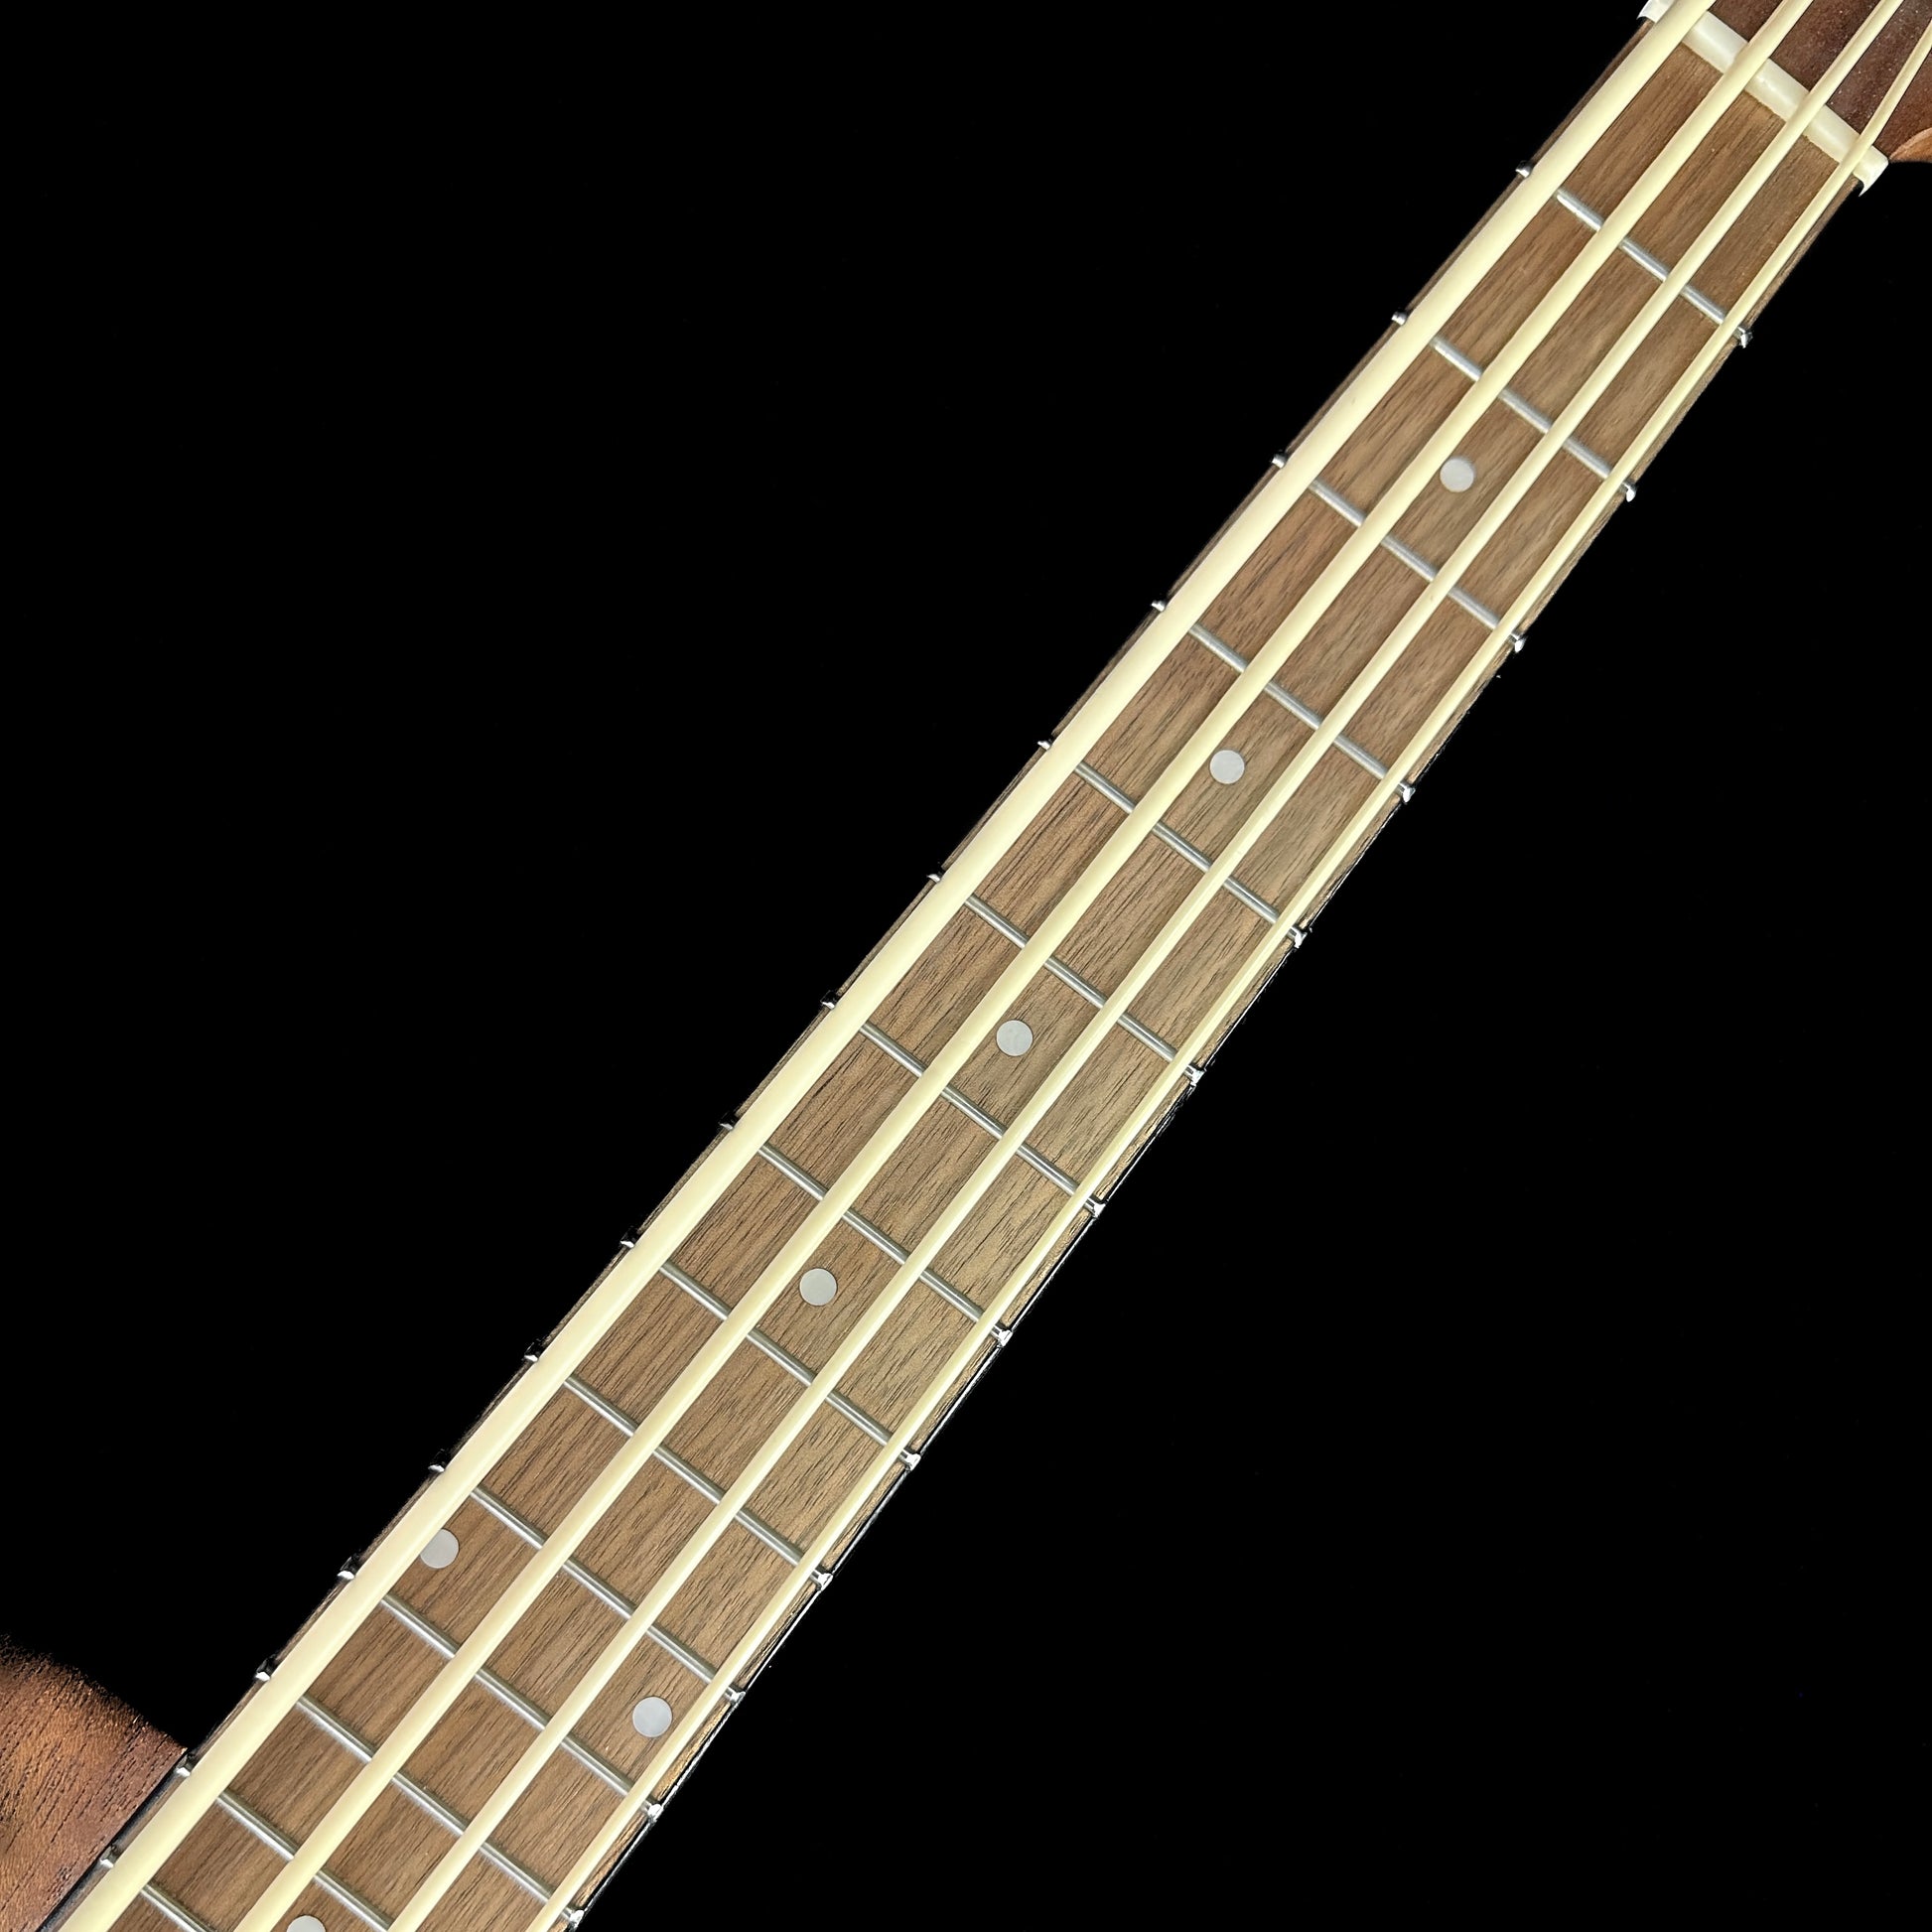 Fretboard of Used Gold Tone MicroBass.